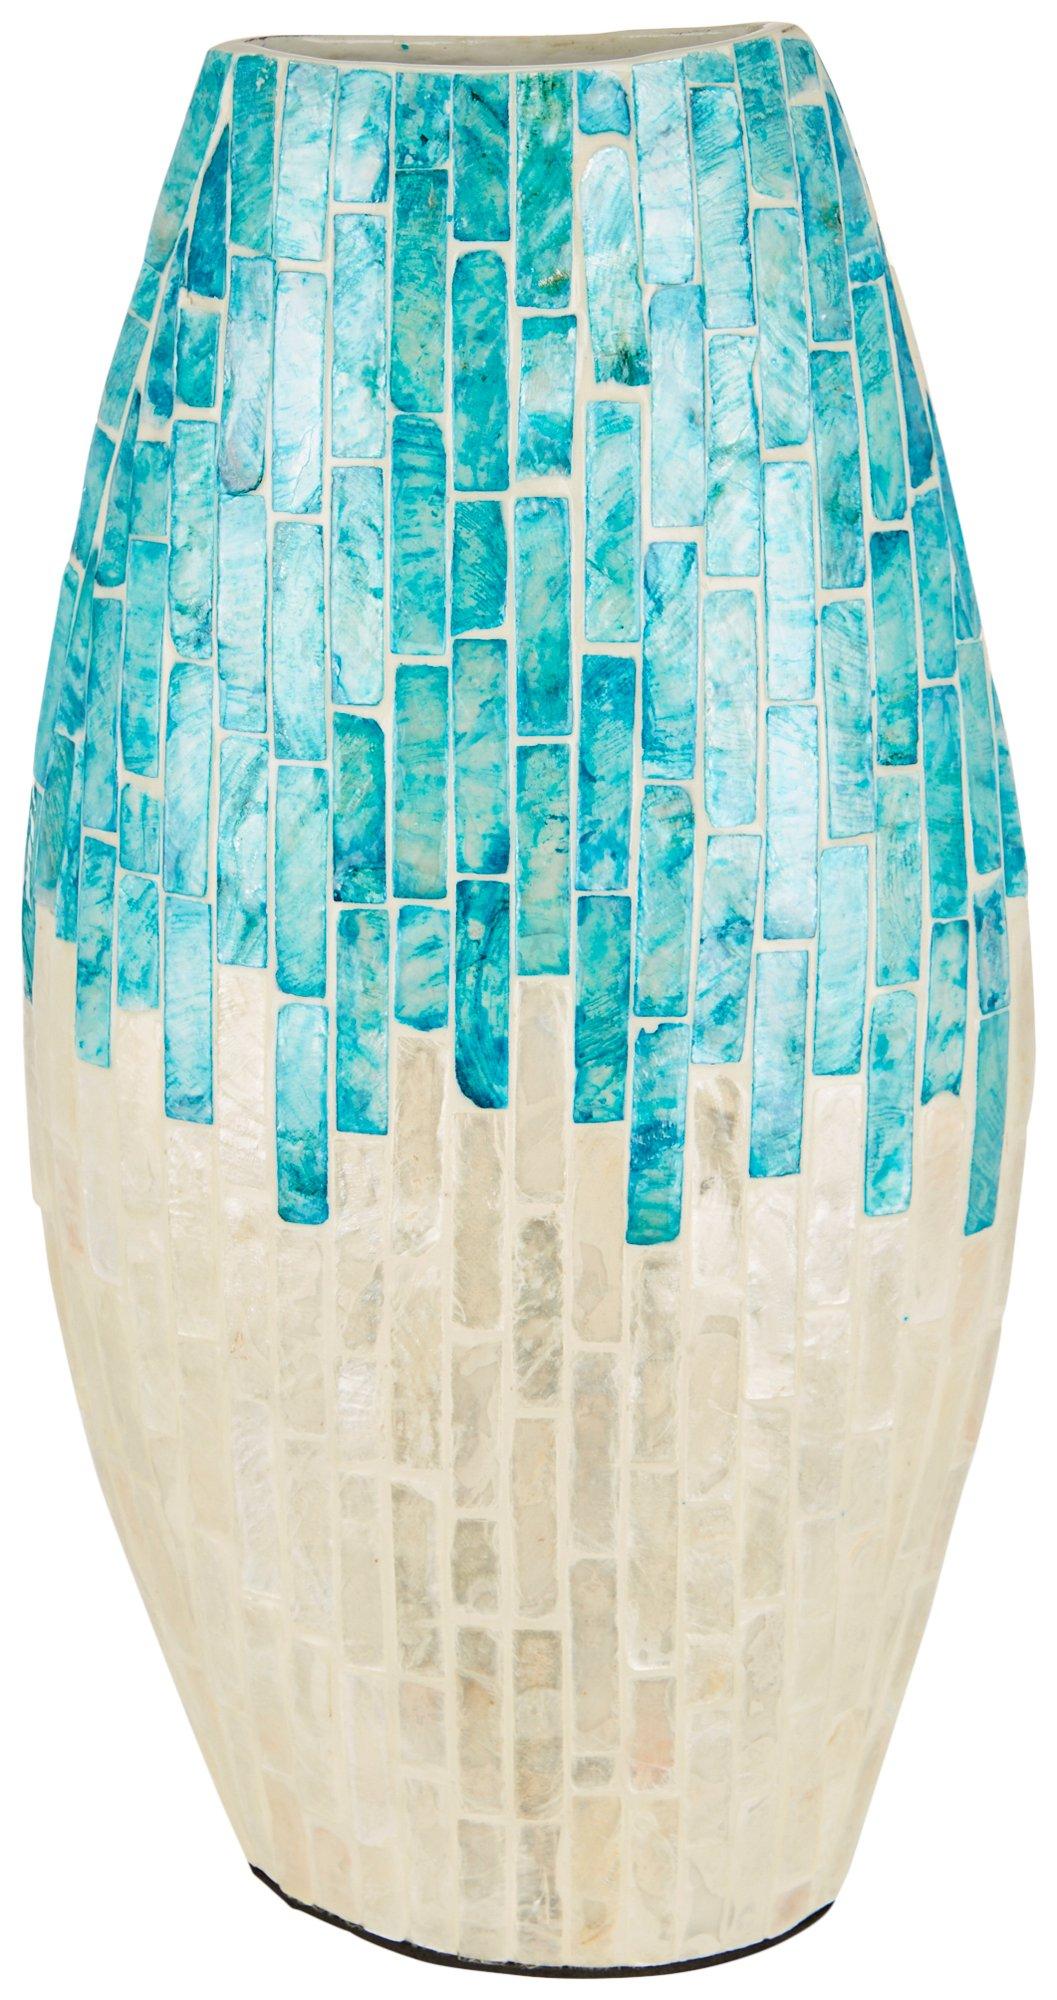 Young's 12in. Mosaic Vase